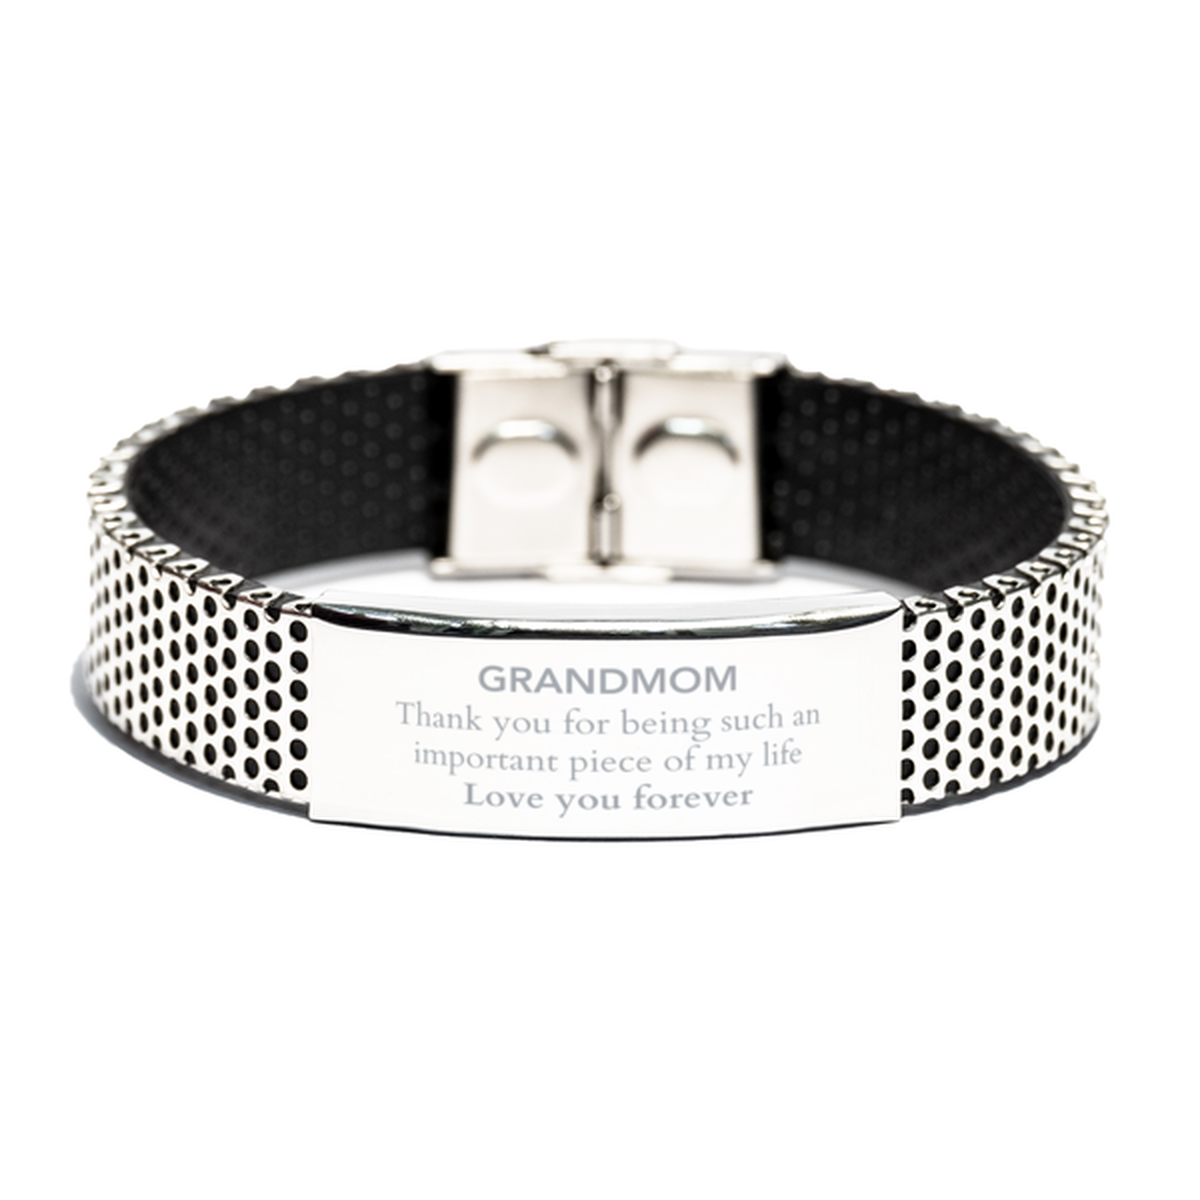 Appropriate Grandmom Stainless Steel Bracelet Epic Birthday Gifts for Grandmom Thank you for being such an important piece of my life Grandmom Christmas Mothers Fathers Day